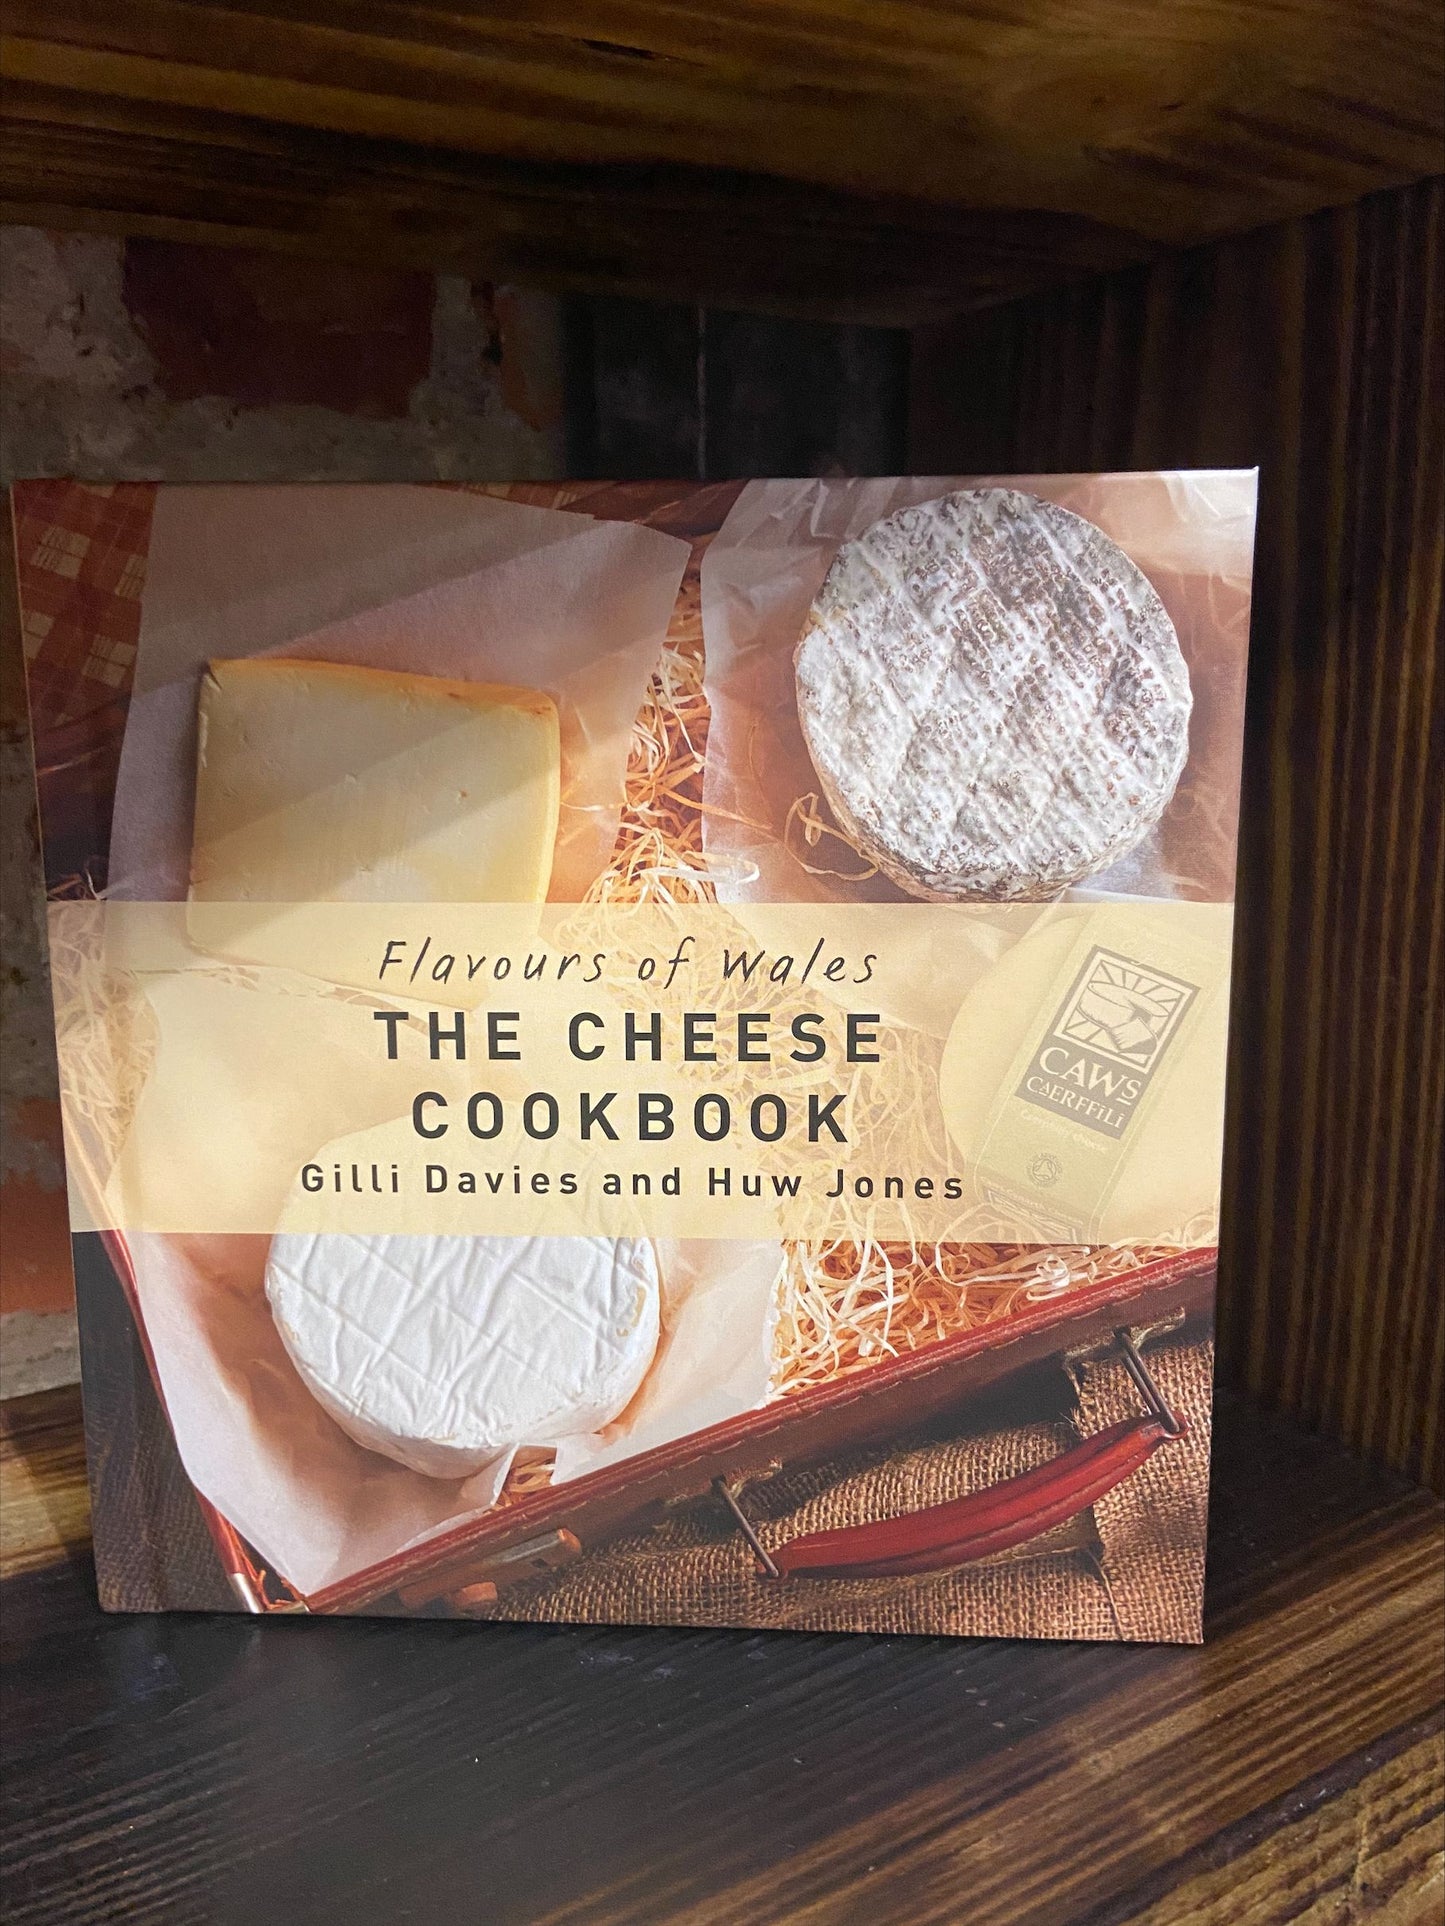 The Cheese Cookbook - Flavours of Wales